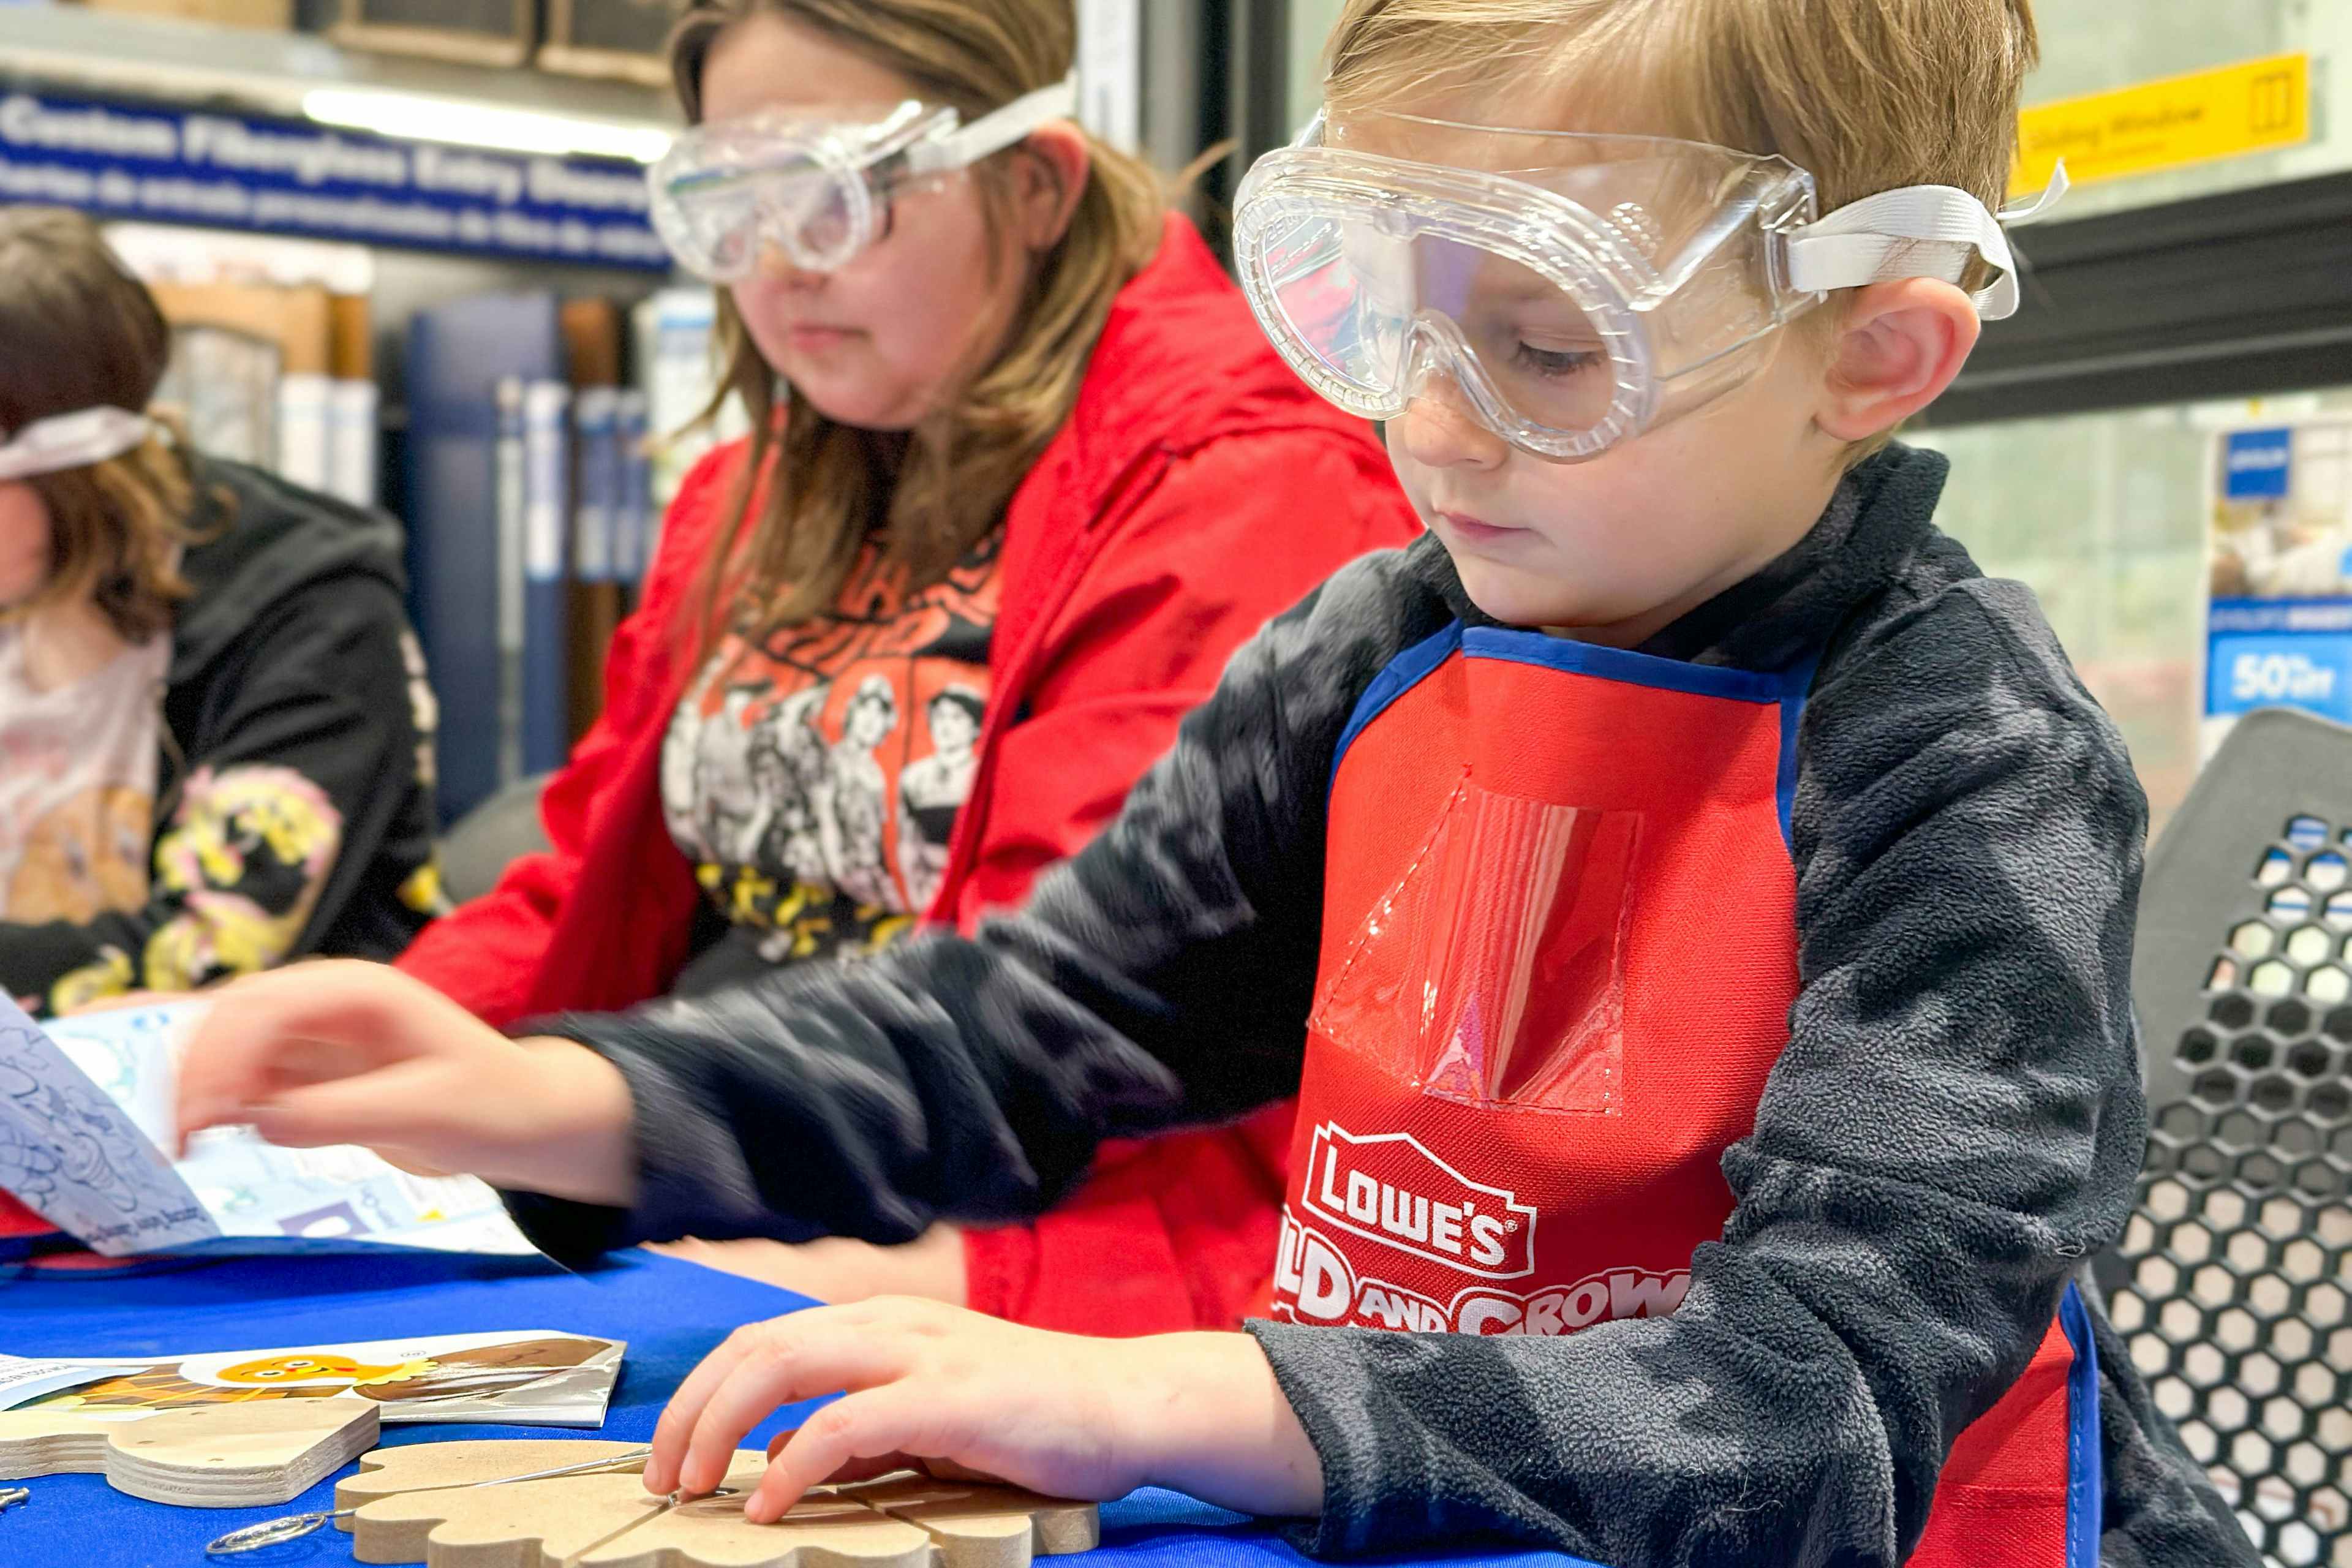 FREE Lowe's Kids' — Free DIY in 2024 The Krazy Coupon Lady